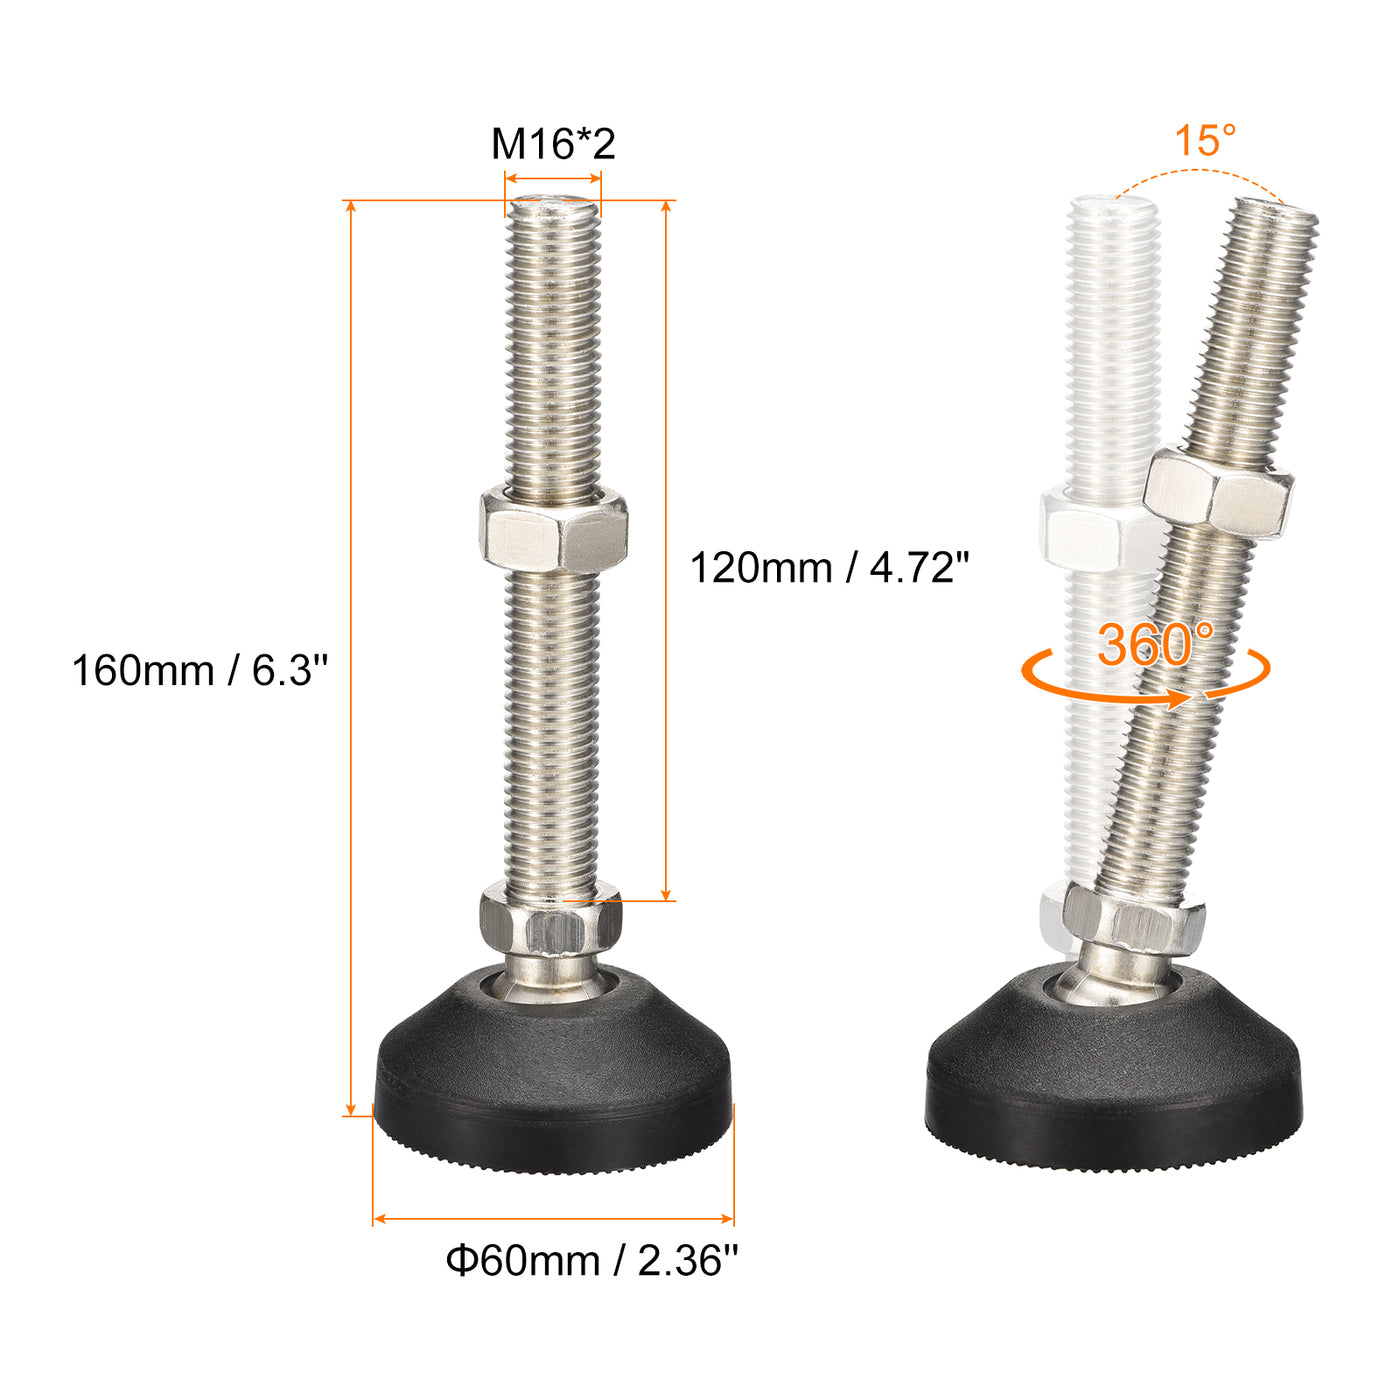 uxcell Uxcell Furniture Levelers, 1Pcs M16x120x60mm Nylon Universal Leveling Feet, Adjustable Swivel Table Feet for Furniture Workshop Machines Machinery Equipment